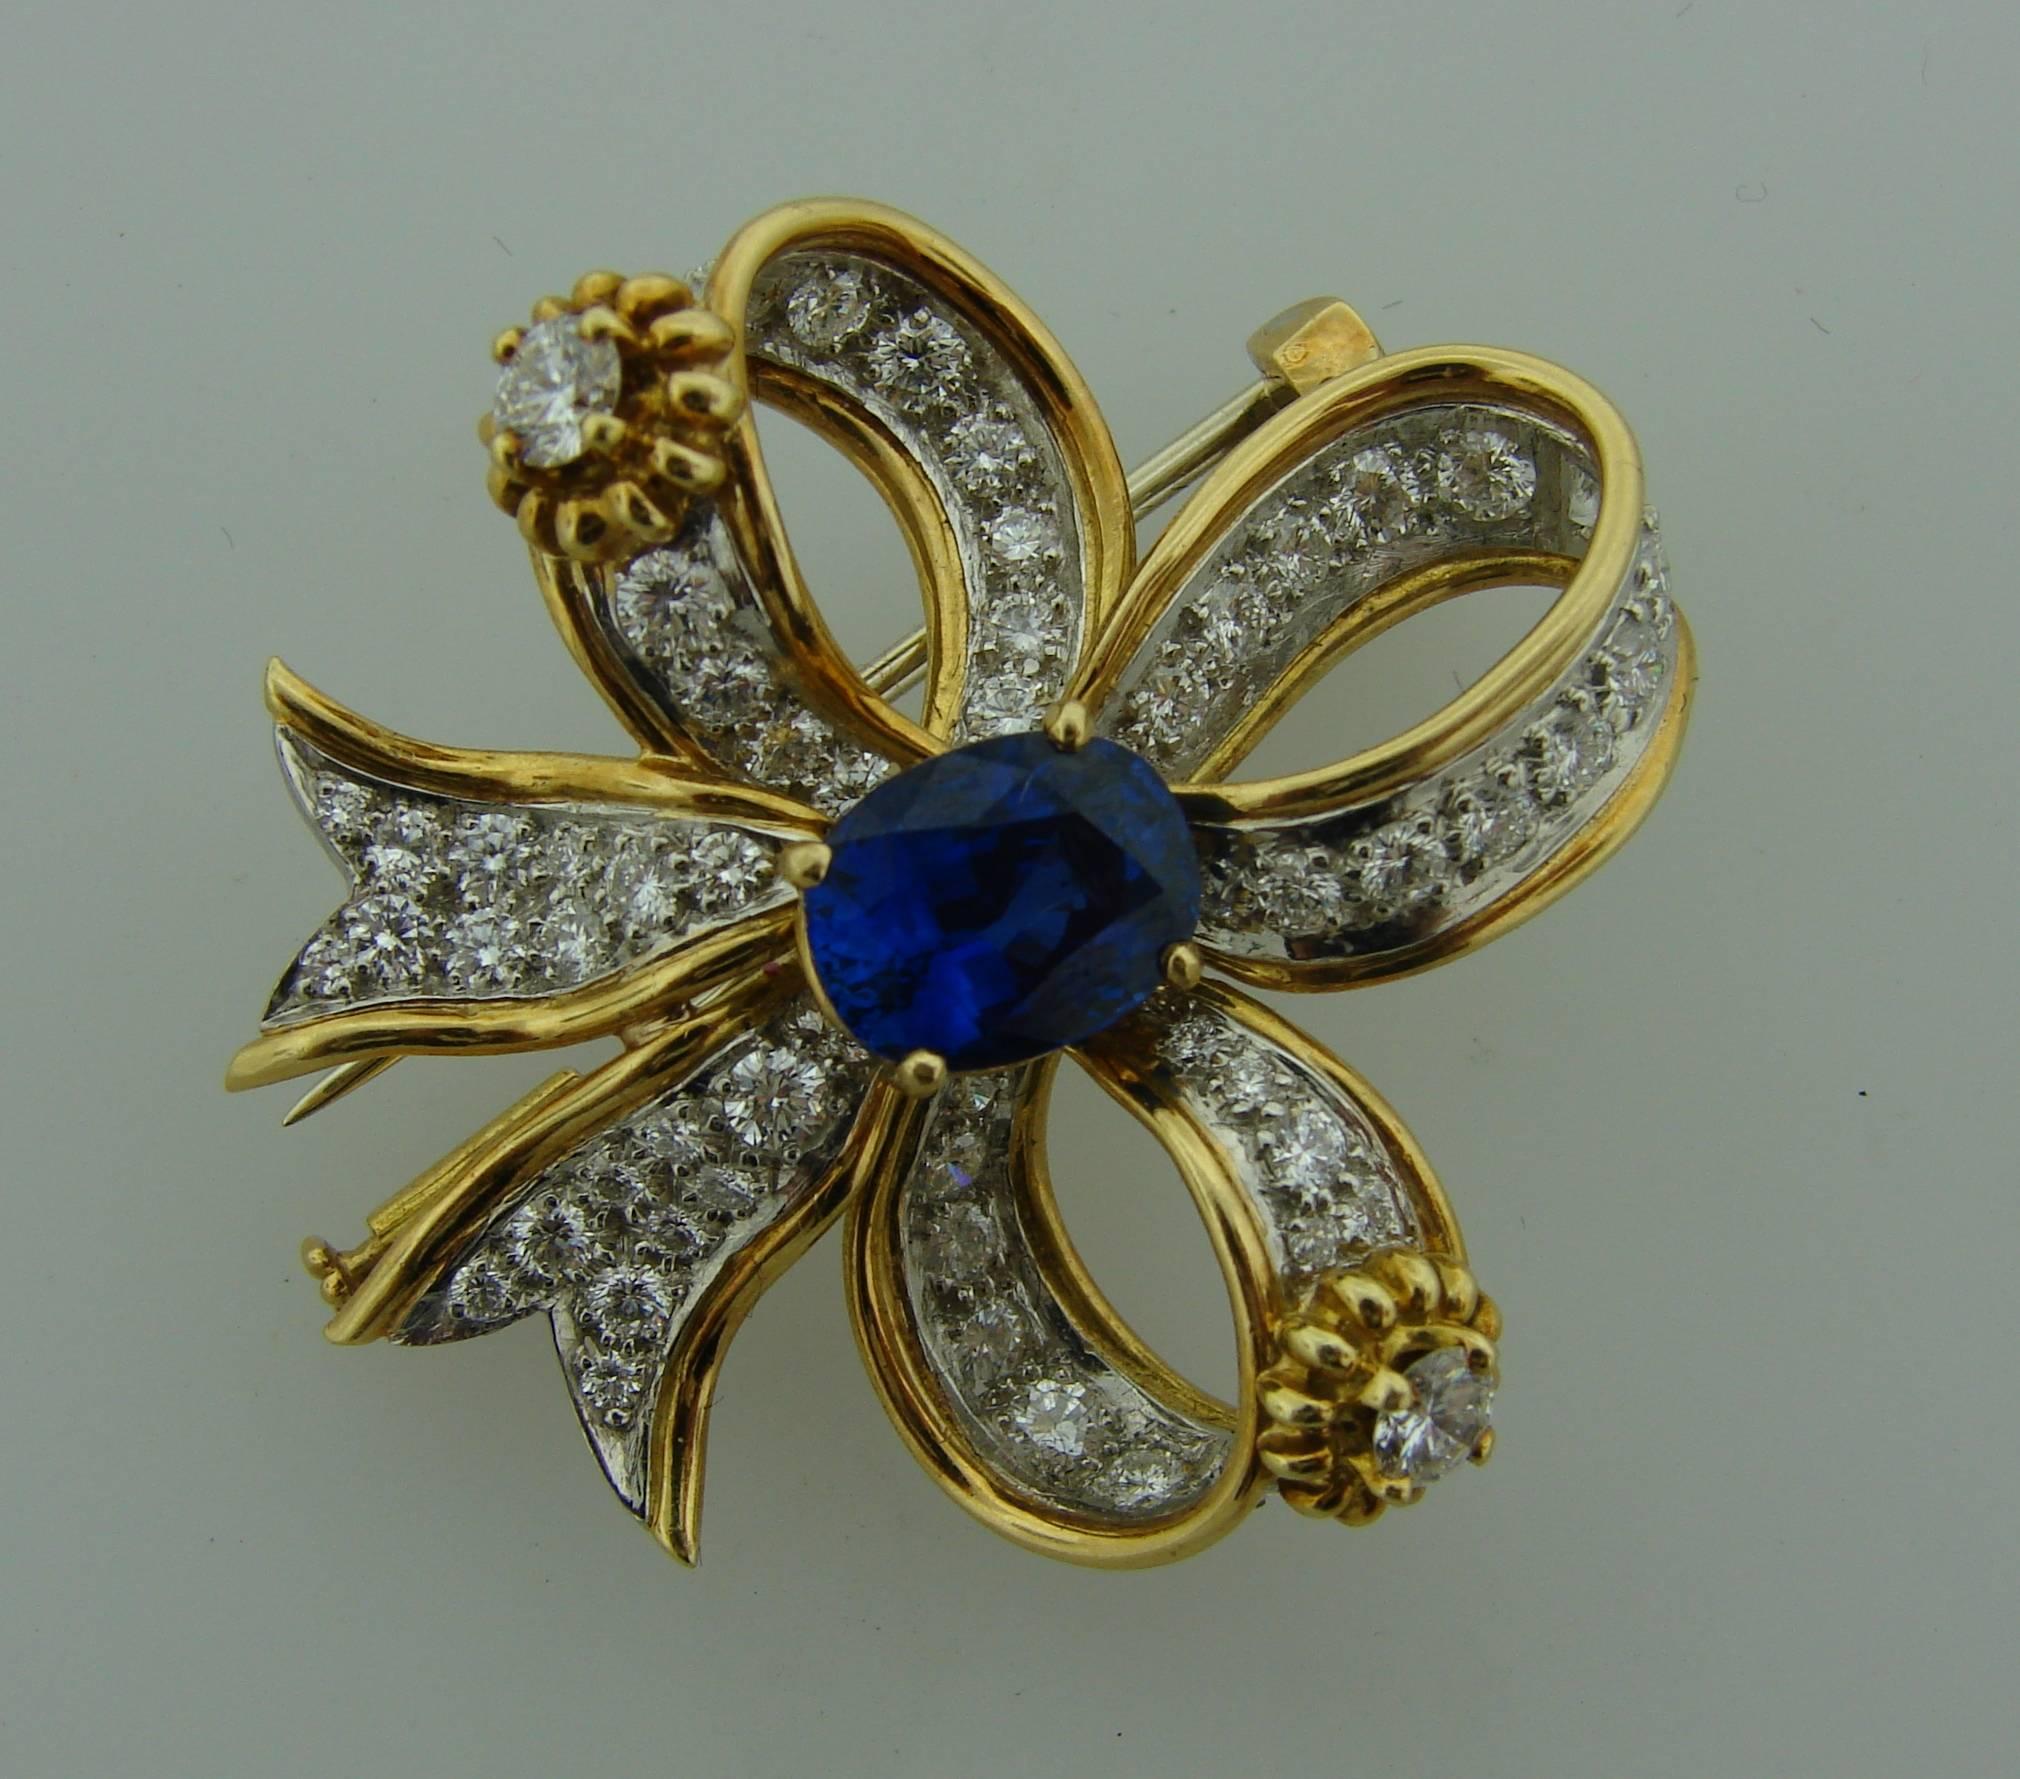 Lovely clip created by Jean Schlumberger for Tiffany & Co. in the 1950s. Designed as a beautiful bow and features a sapphire set in 18 karat (stamped) yellow and white gold set with round brilliant cut diamonds. The sapphire is oval shape, faceted,